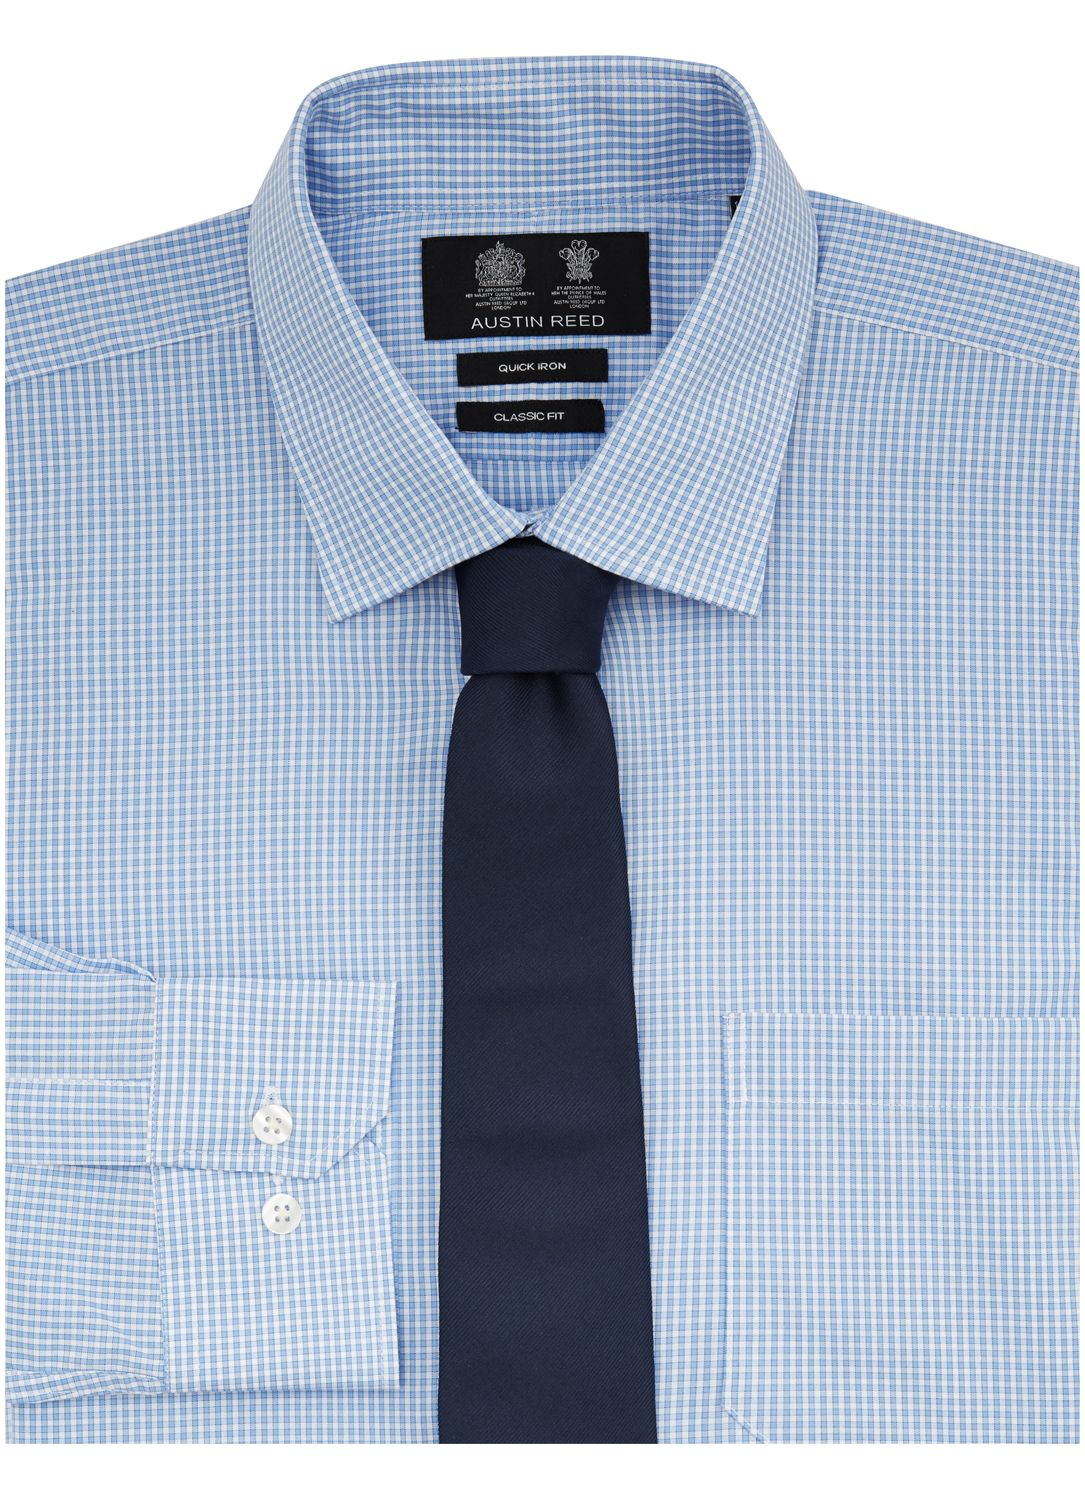 Austin reed Quick Iron Classic Blue Gingham Shirt in Blue for Men | Lyst